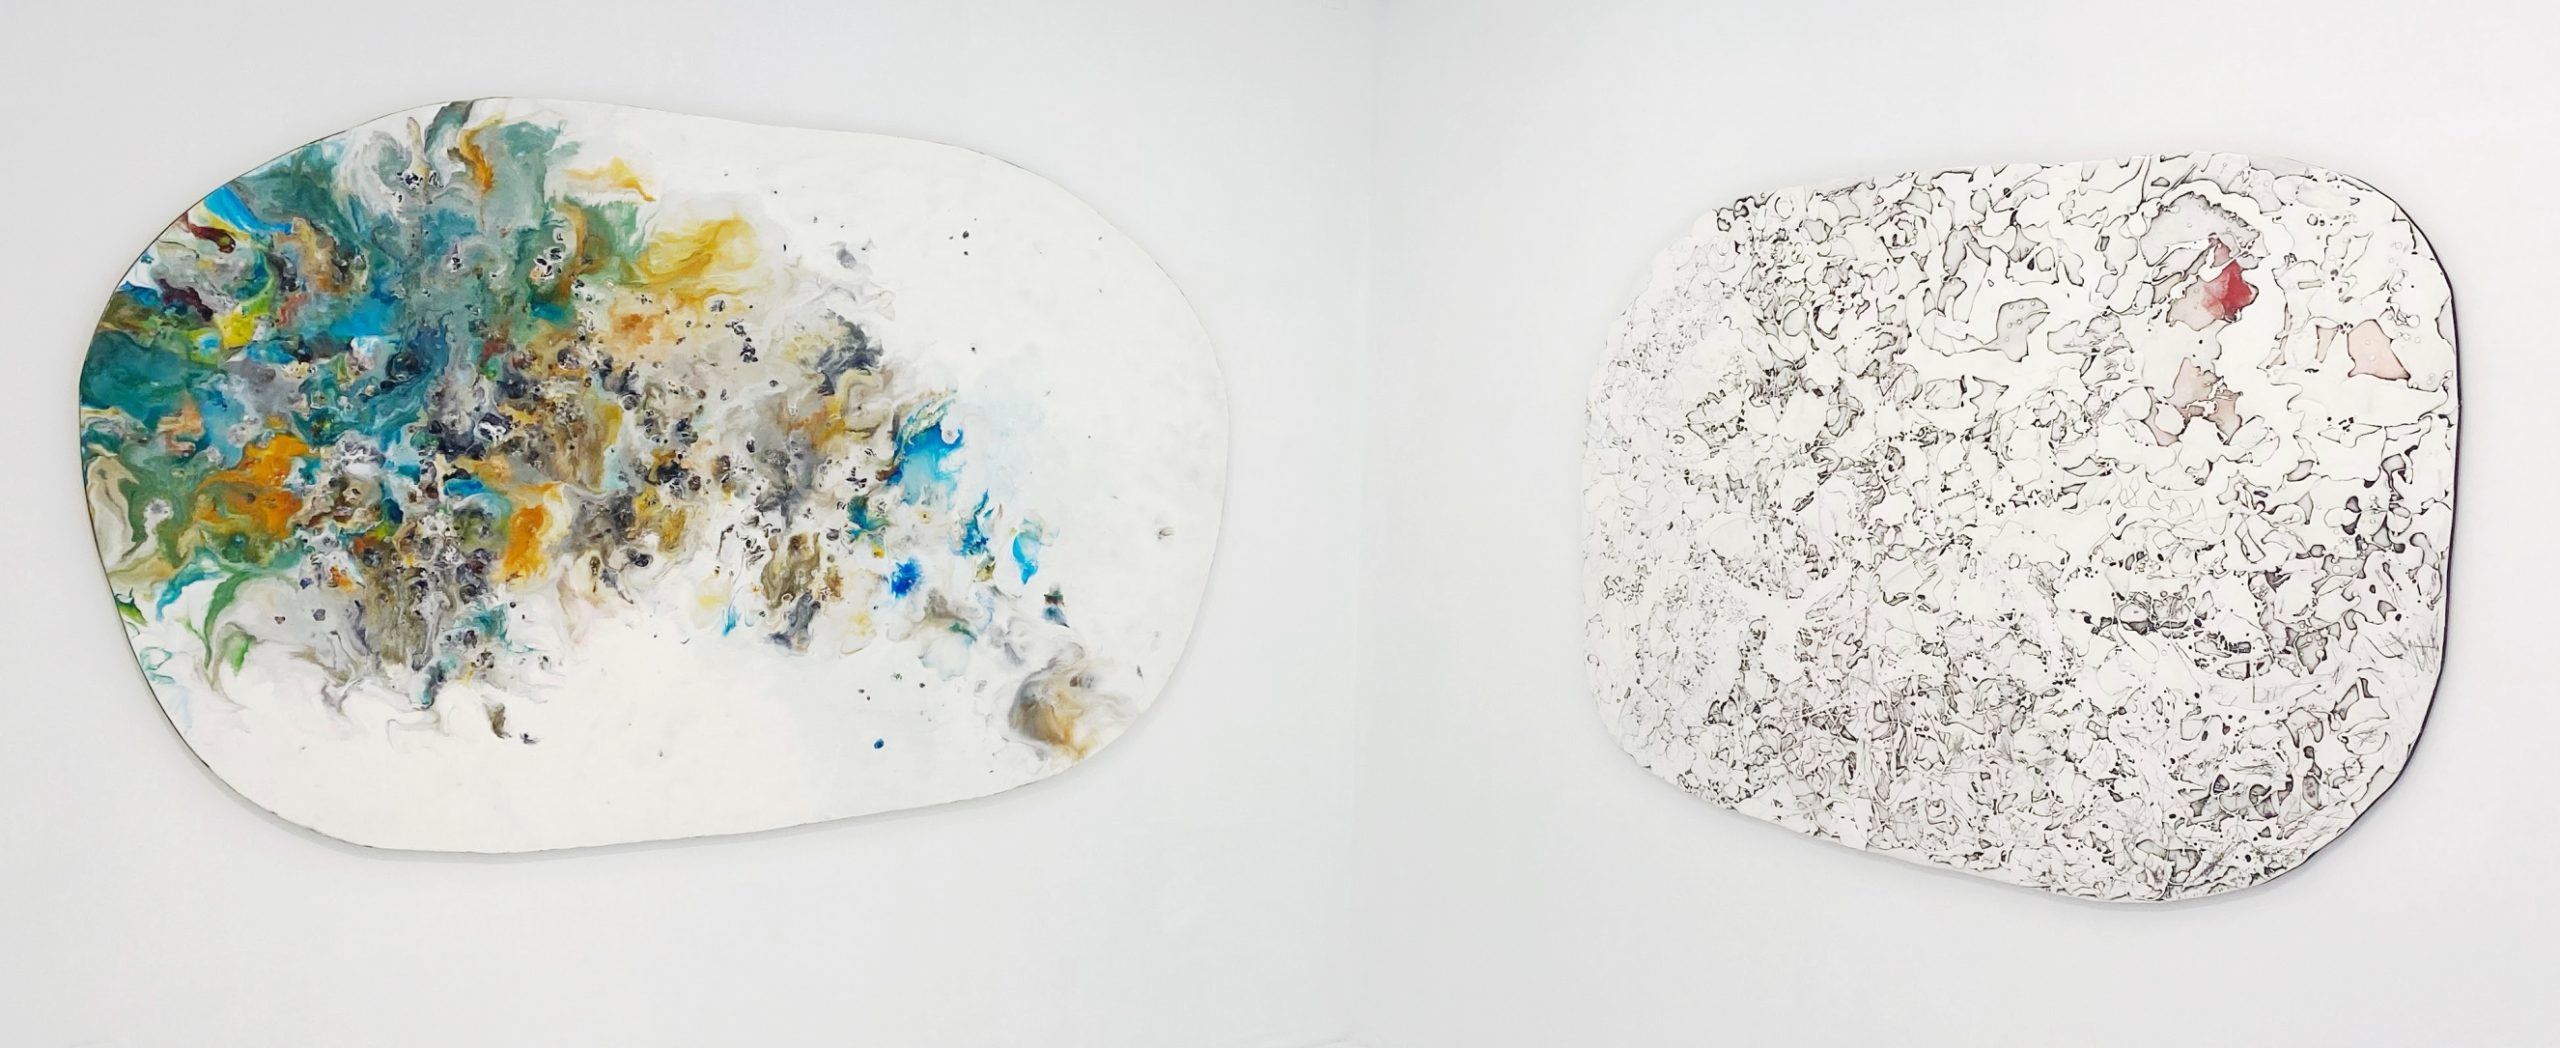 Space 776 Has Presented a New Solo Exhibition of Lynn Basa